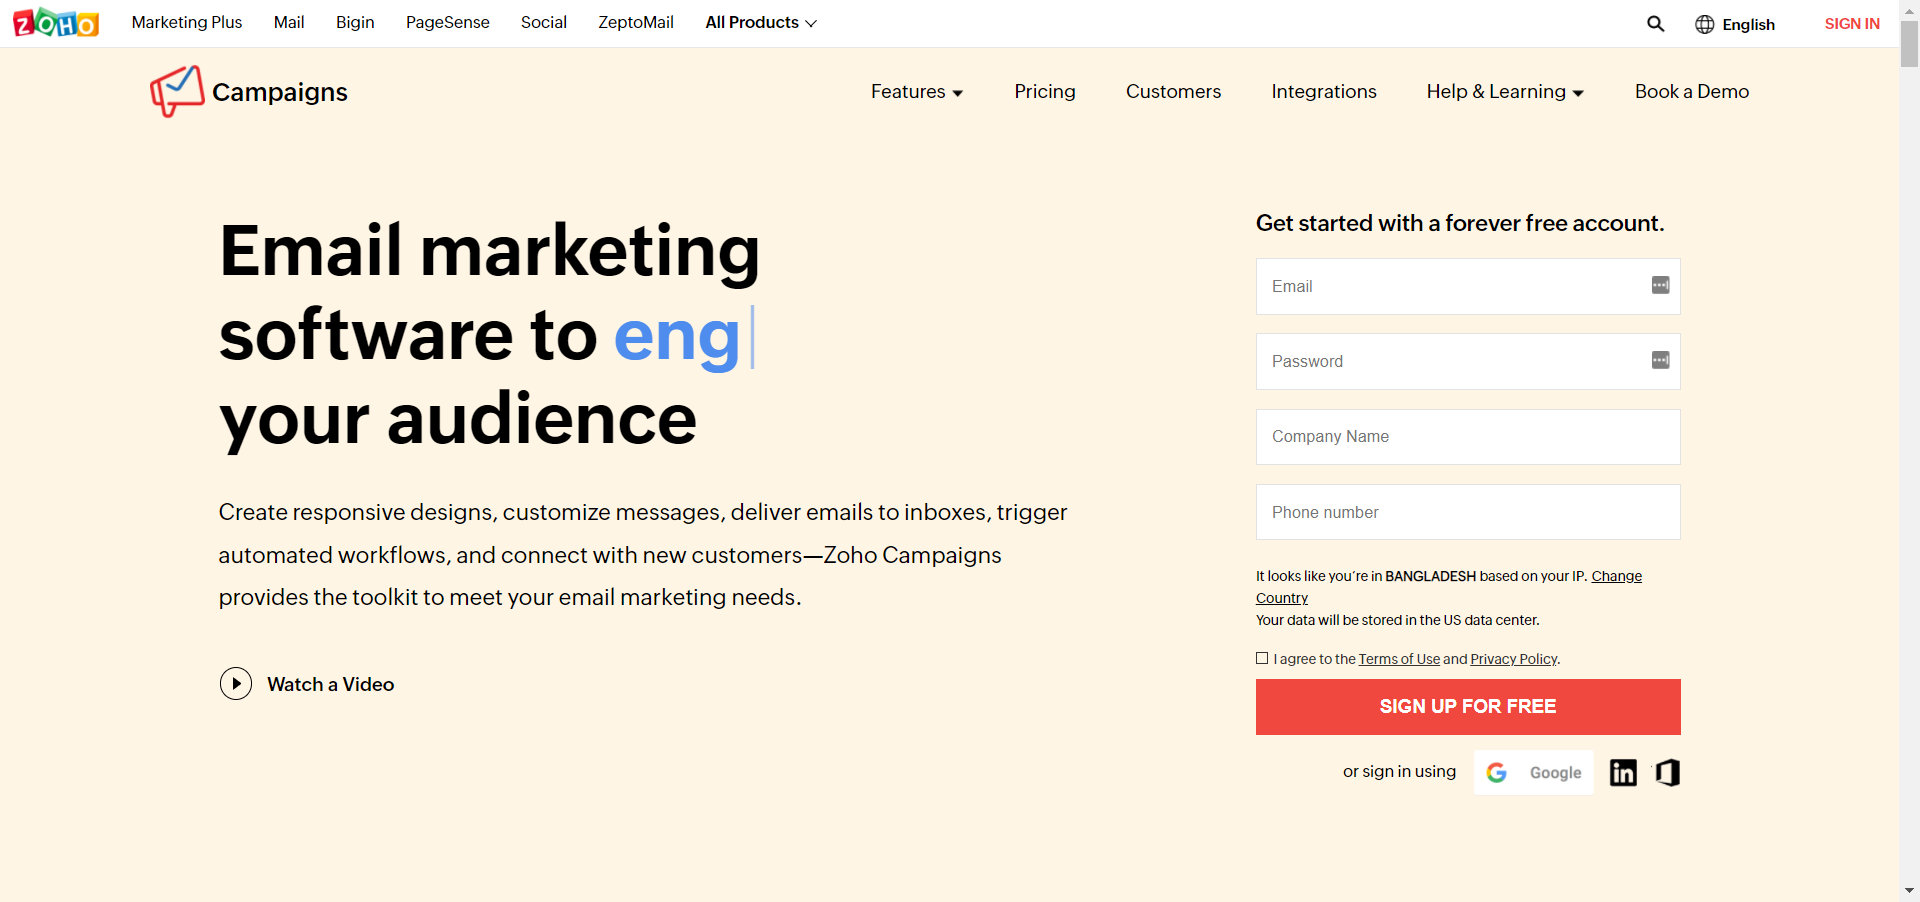 Email marketing software Zoho Campaigns